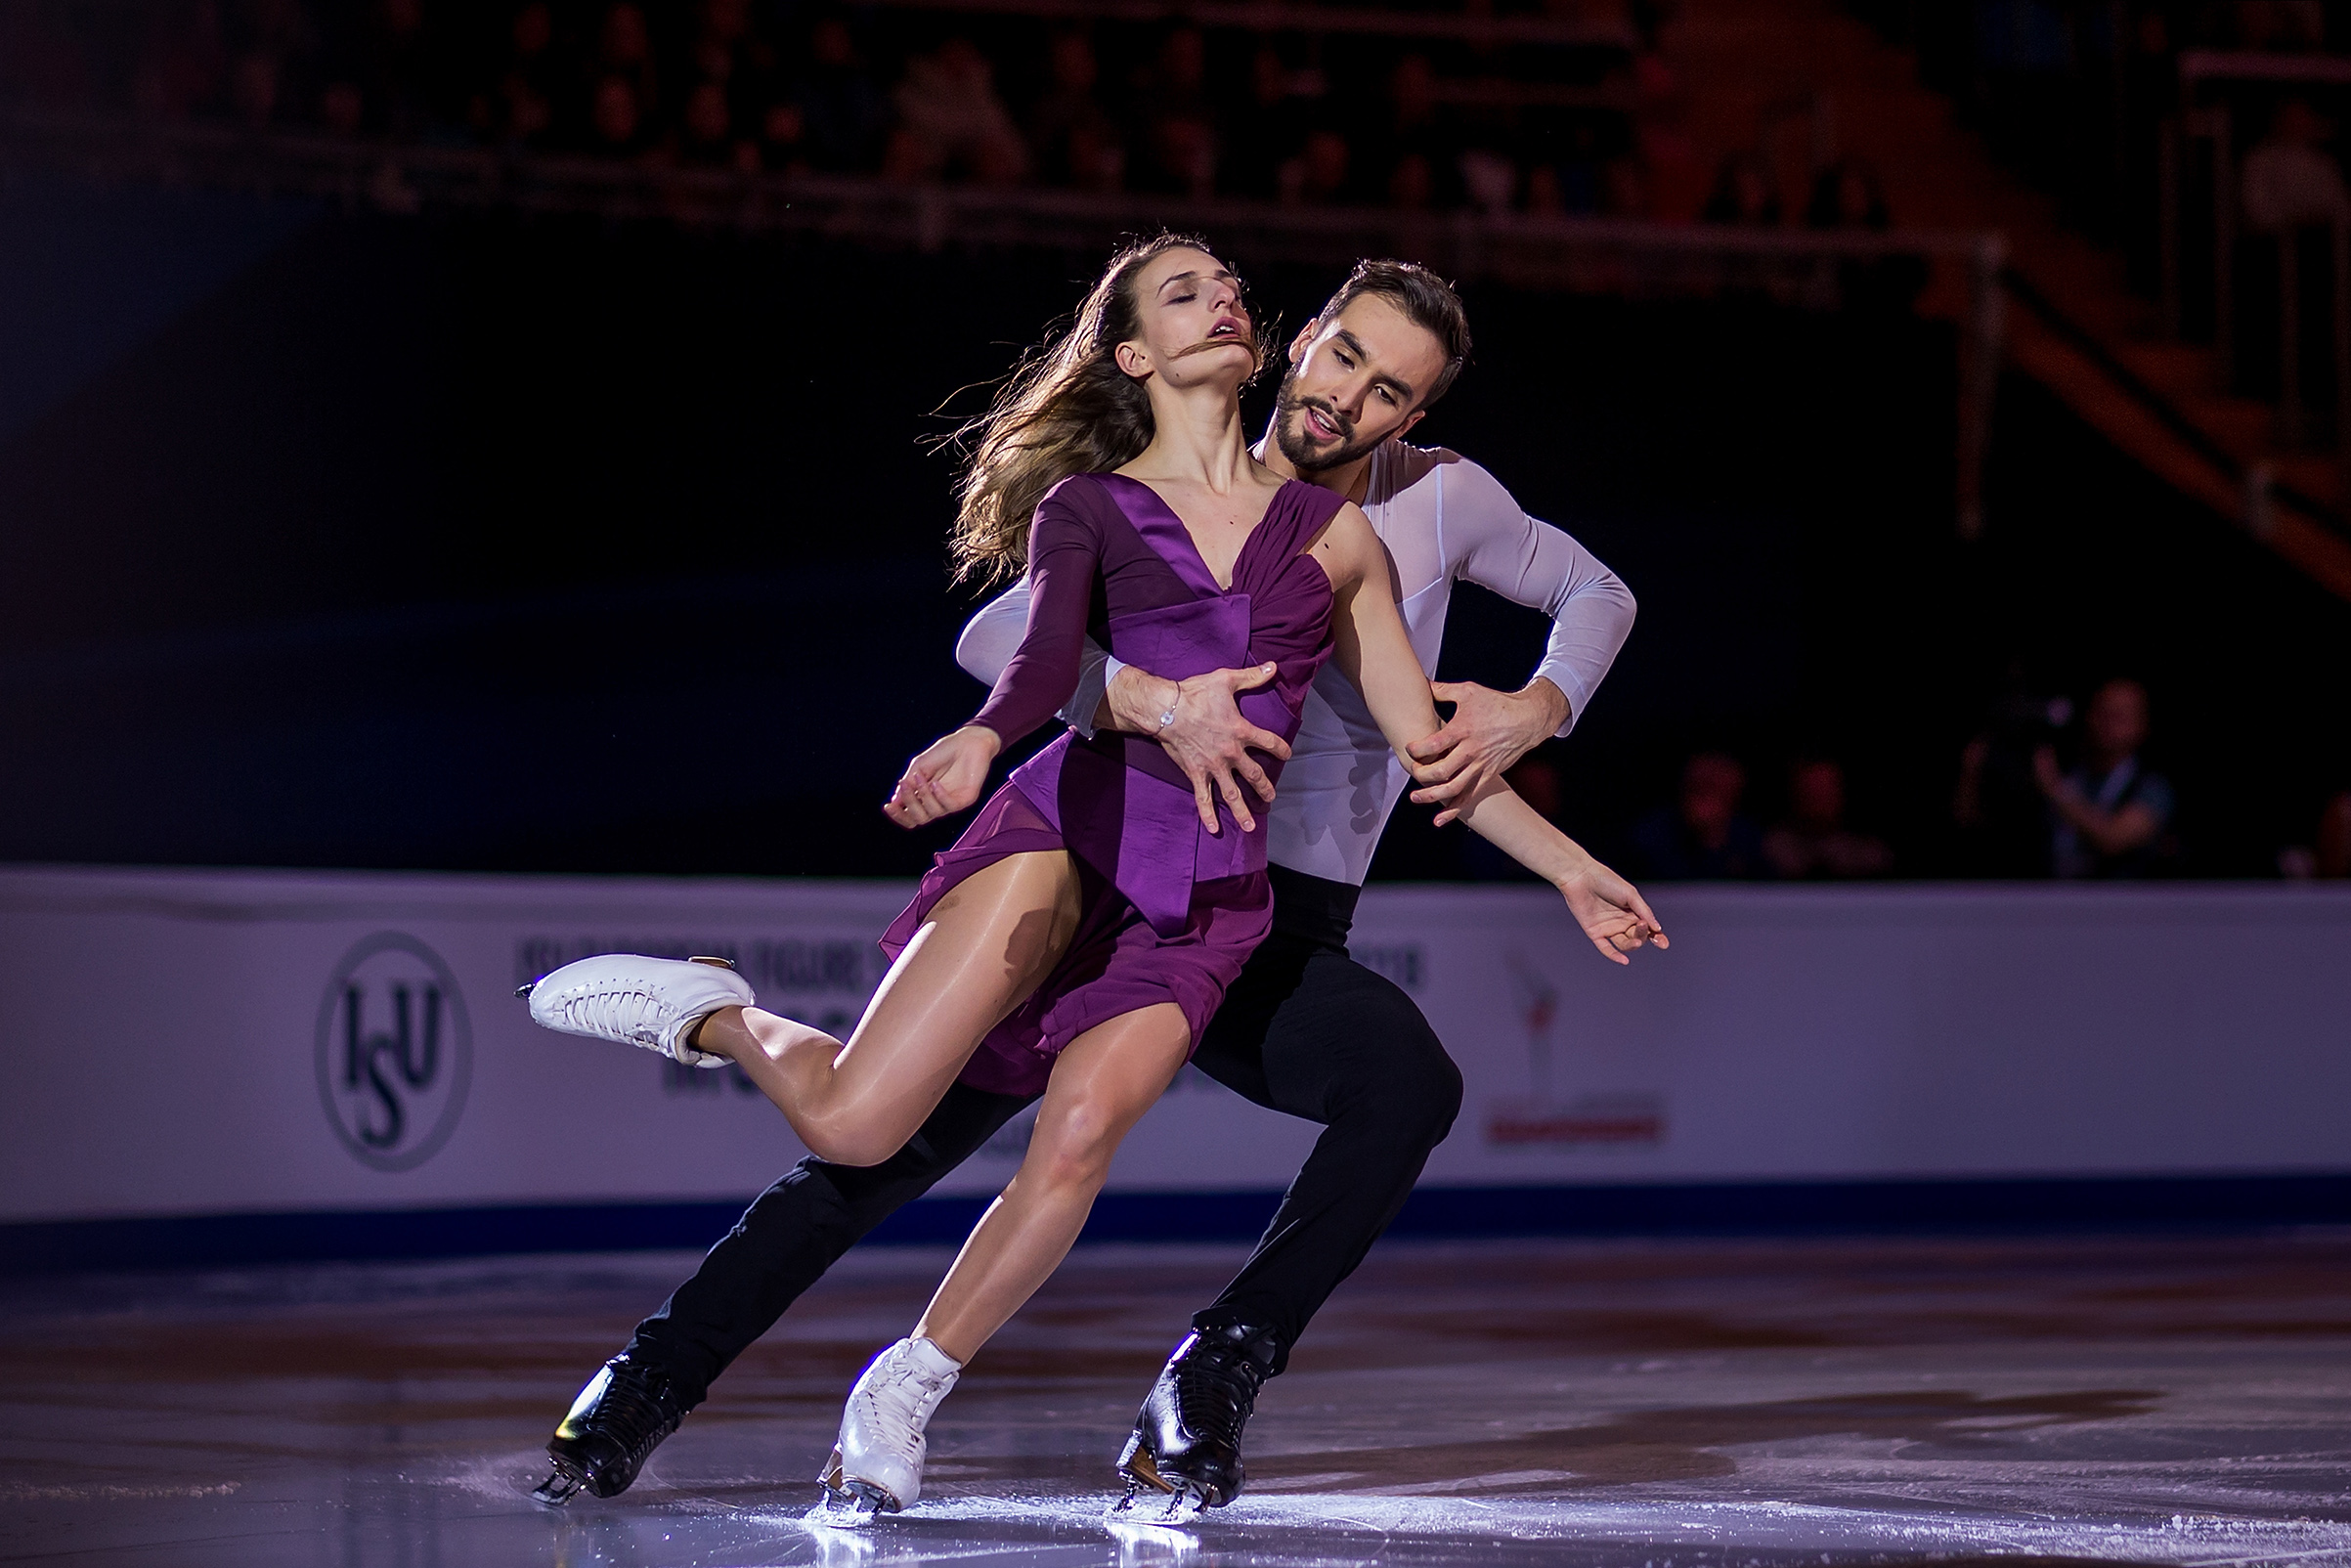 Gabriella Papadakis and Guillaume Cizeron of France perform in the Gala Exhibition during day five of the European Figure Skating Championships at Megasport Arena, in Moscow, Russia, on Jan. 21, 2018. Joosep Martinson—ISU/Getty Images (Joosep Martinson—ISU/Getty Images)